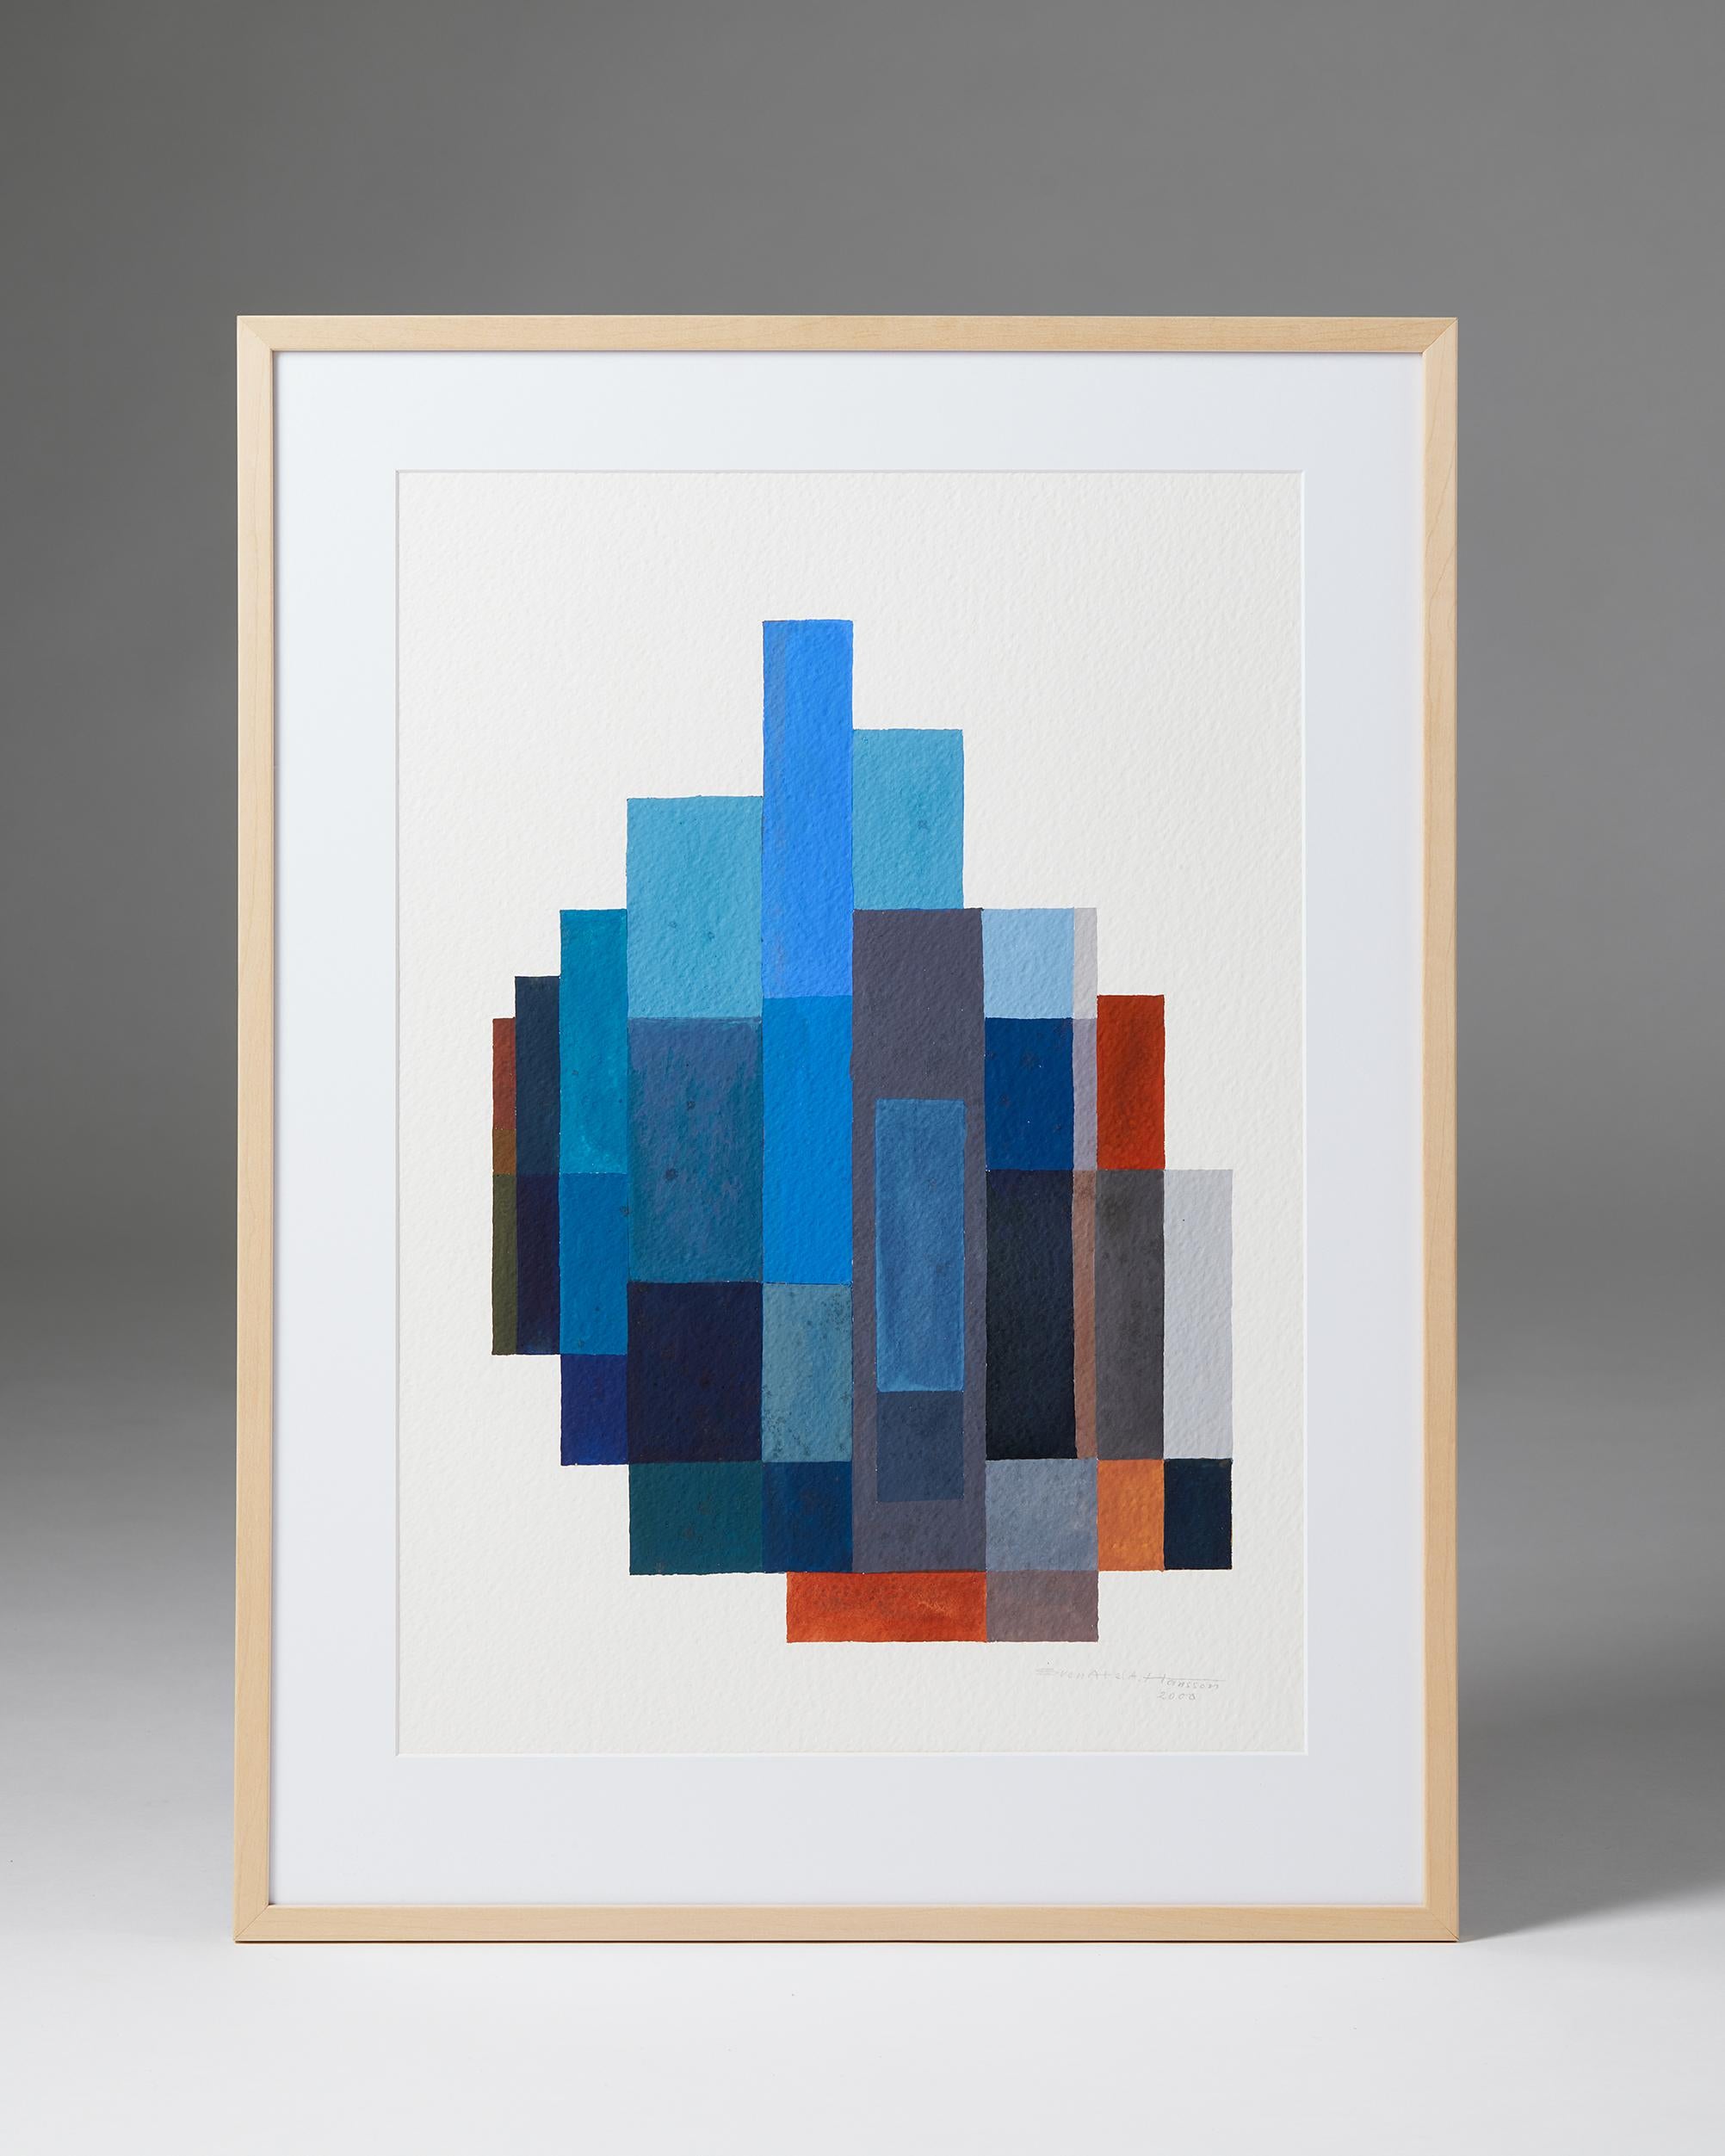 Painting by Sven Hansson,
Sweden, 2000.

Watercolour on paper, framed.

Signed.

Measurements:
H: 73 cm
W: 55 cm
D: 1.5 cm.

Working in a purely geometric, non-figurative style, Sven Hansson was a Swedish painter who is now represented in various